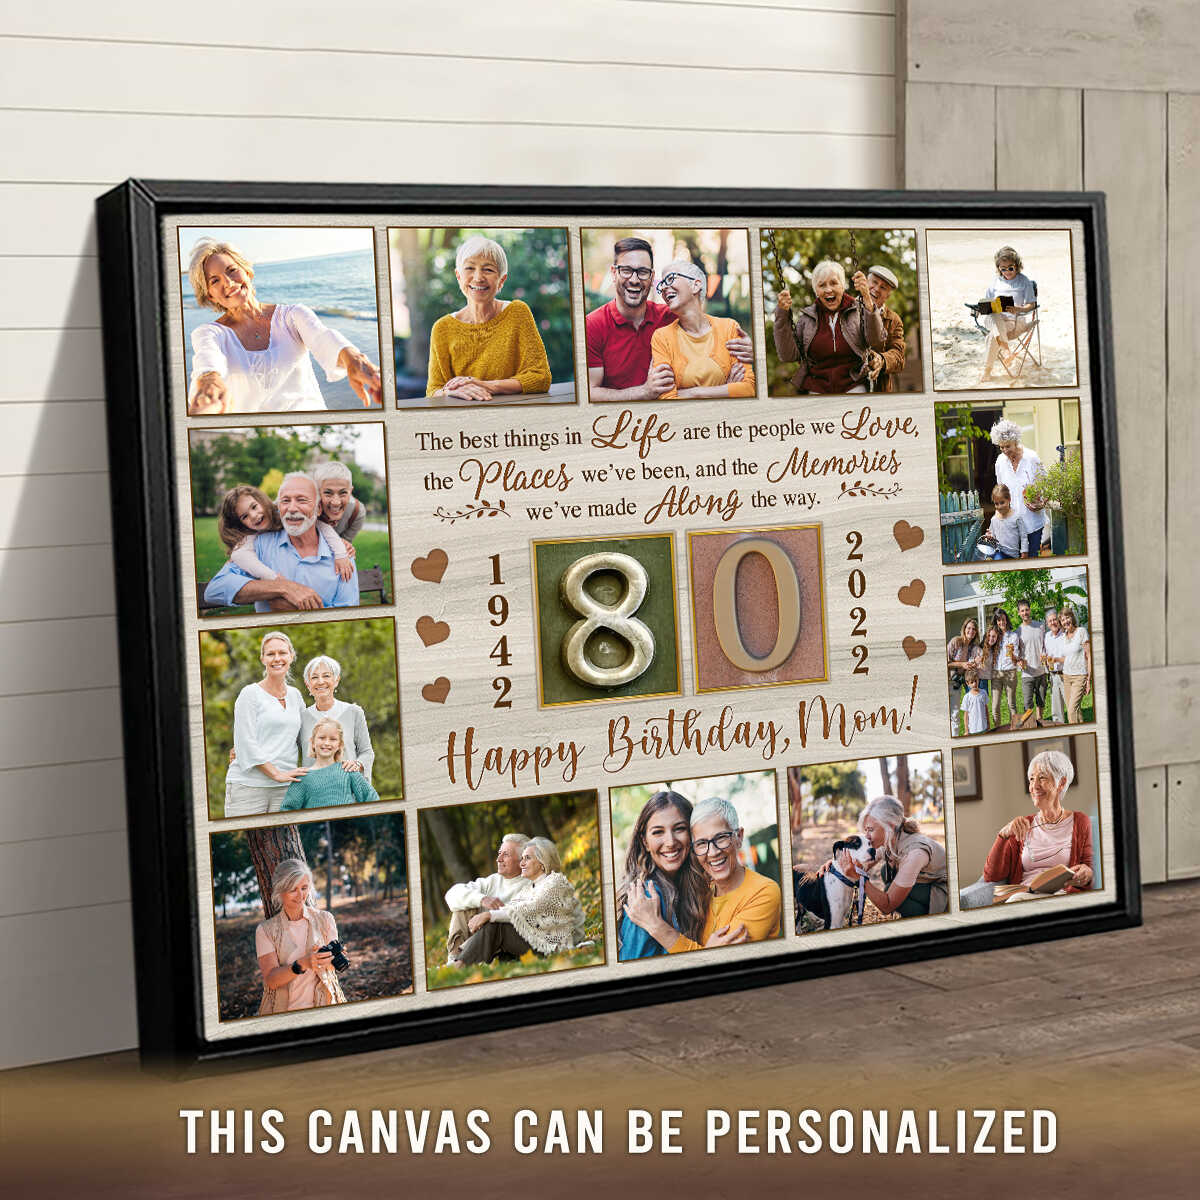 https://images.ohcanvas.com/ohcanvas_com/2022/07/29002055/80th-birthday-gifts-for-mum-personalized-collage-canvas-photo-prints-02.jpg